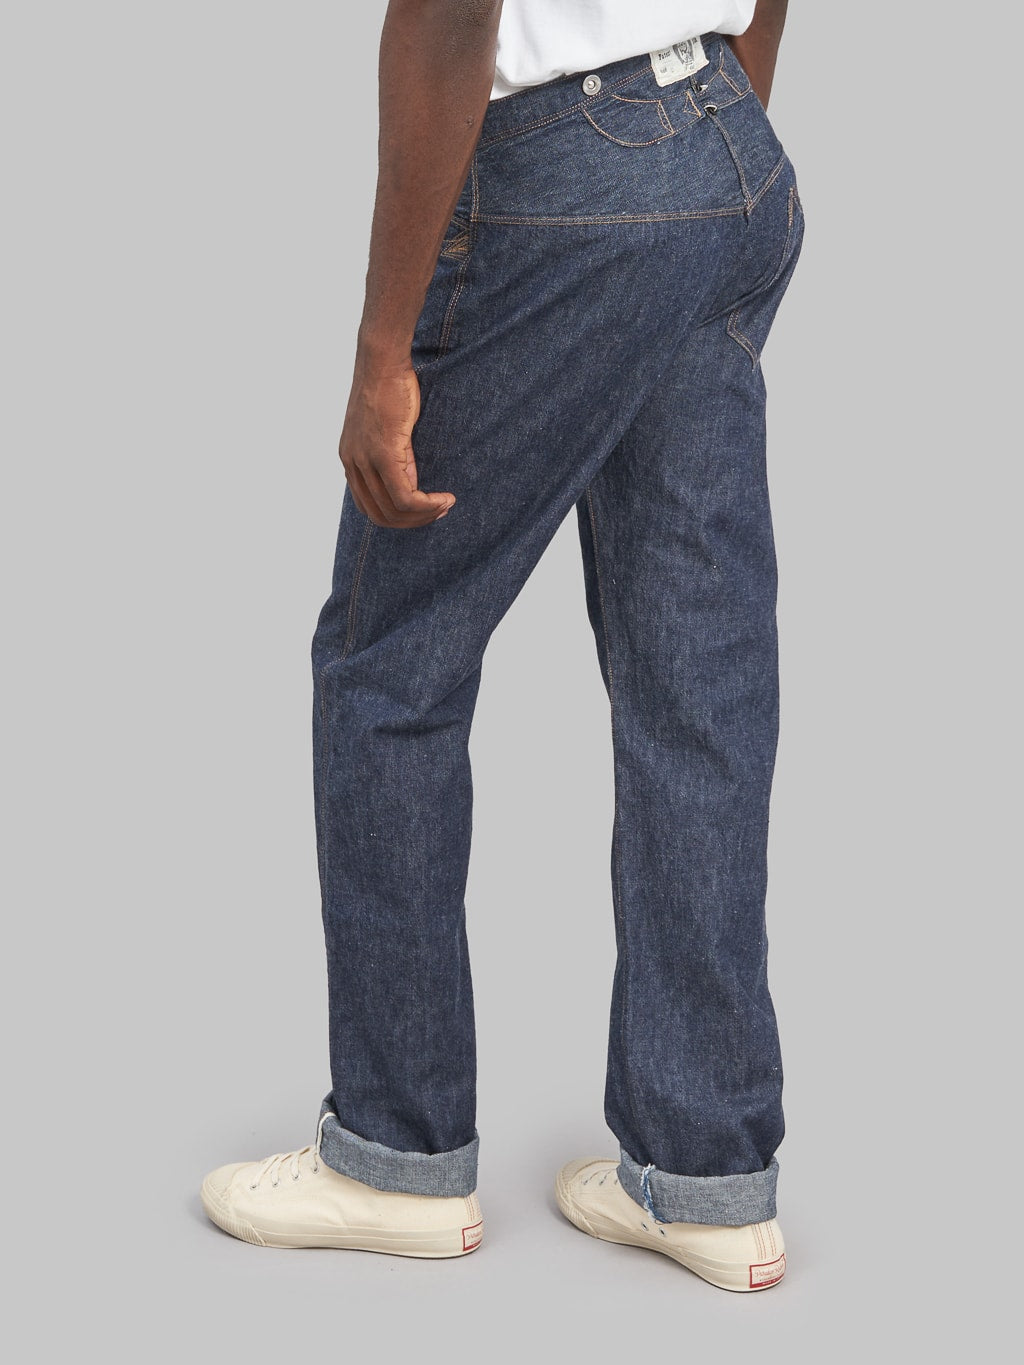 TCB Good Luck Wide Straight Jeans style